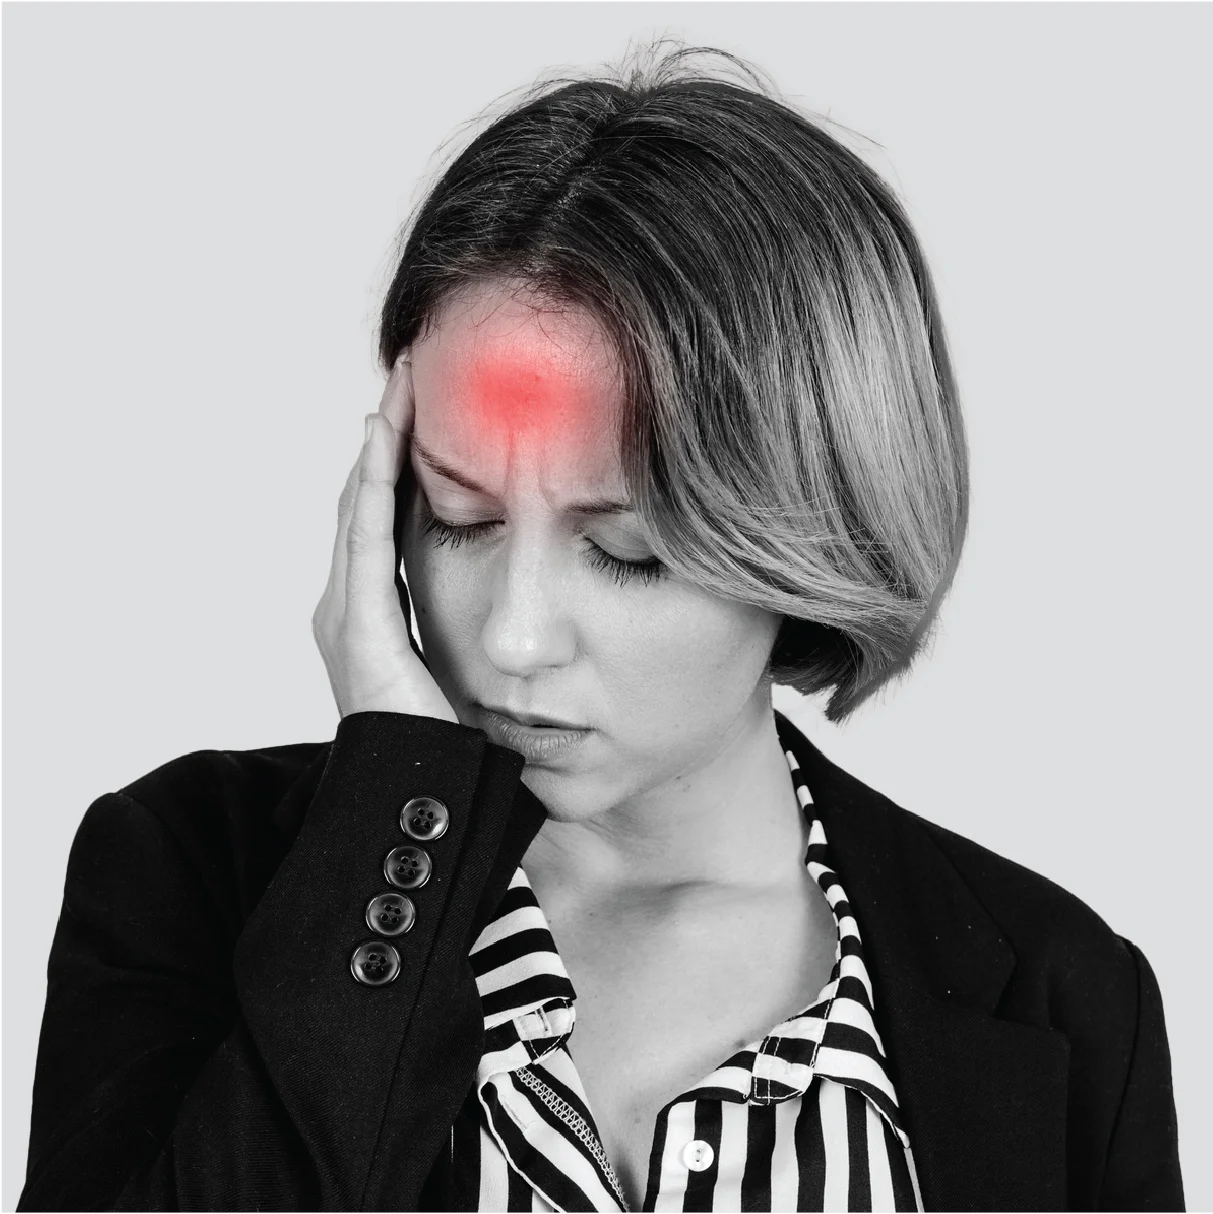 Headache: Causes. Types And Treatment 